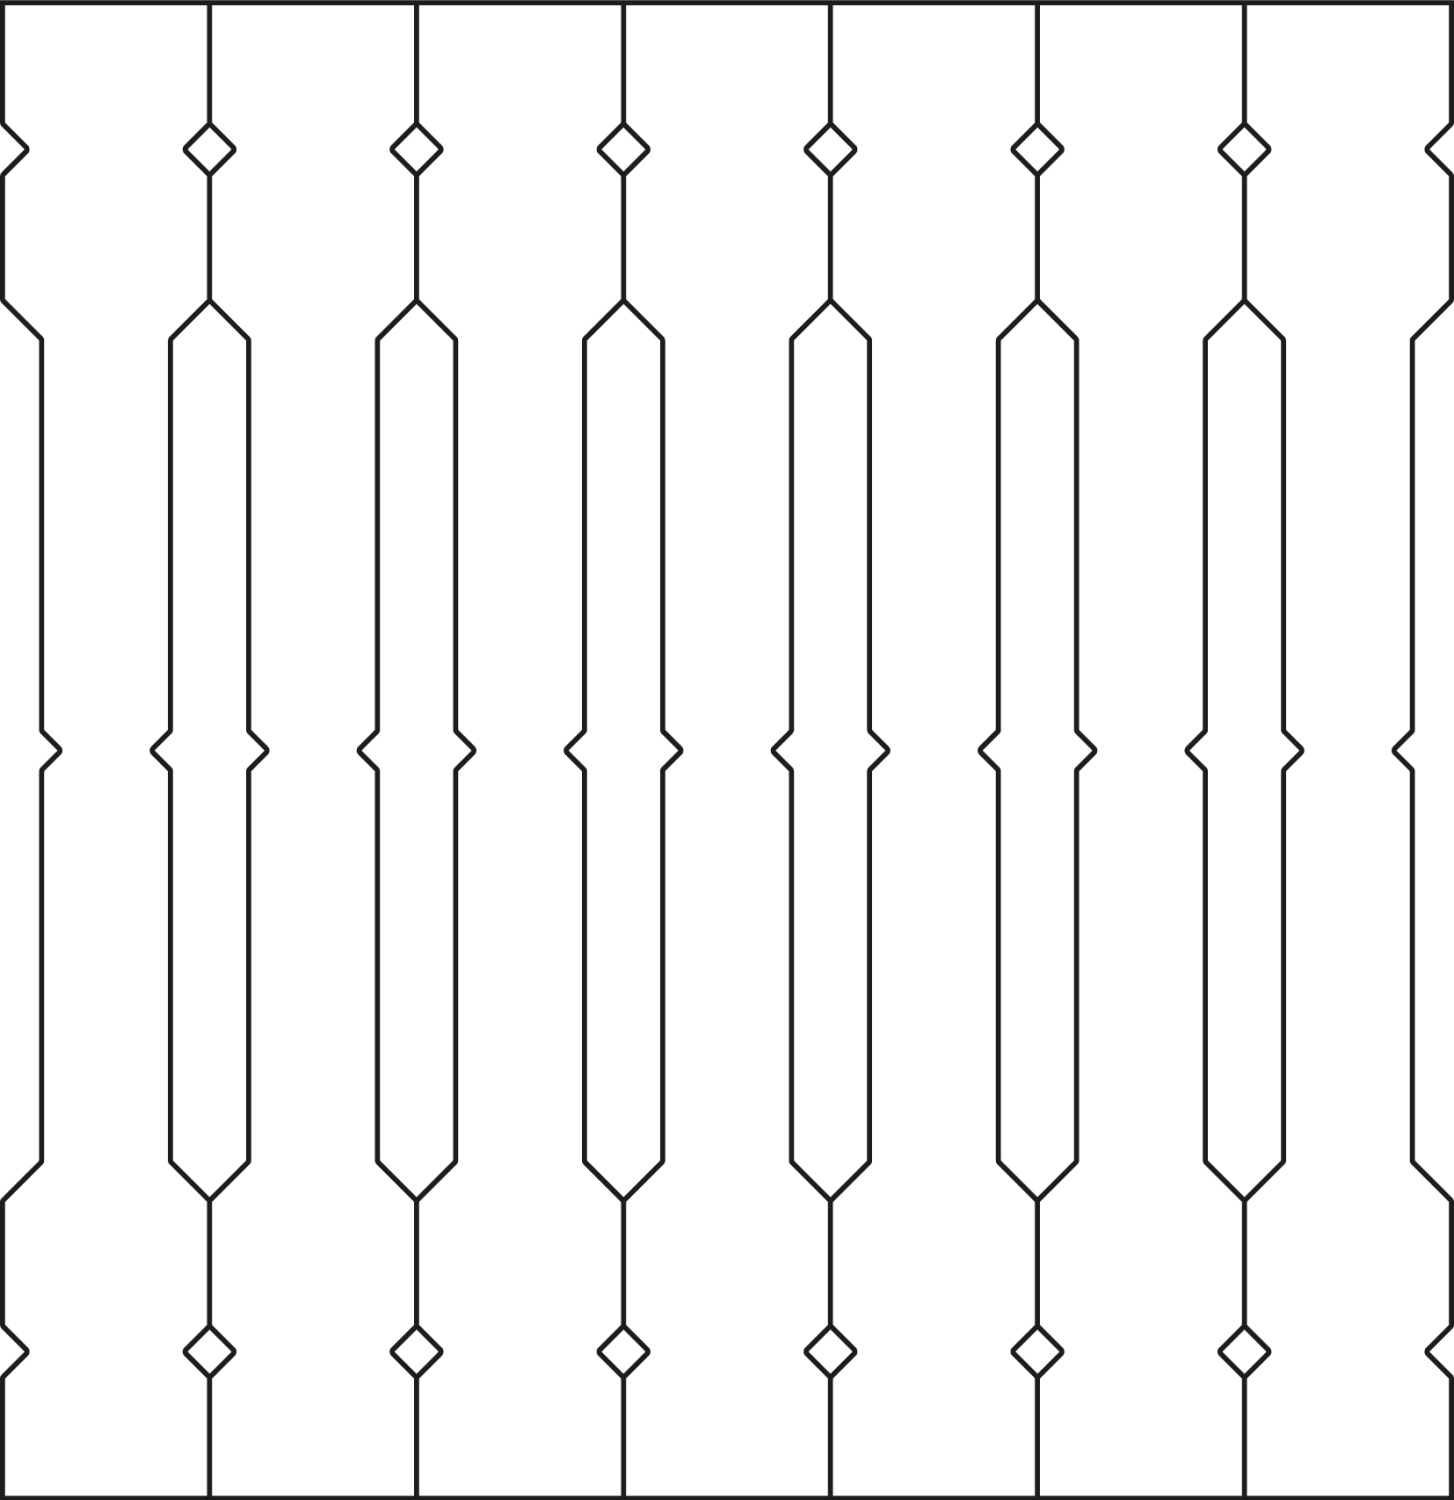 Baluster 022 - The drawing shows 7 Decorative victorian sawn balusters & pickets together